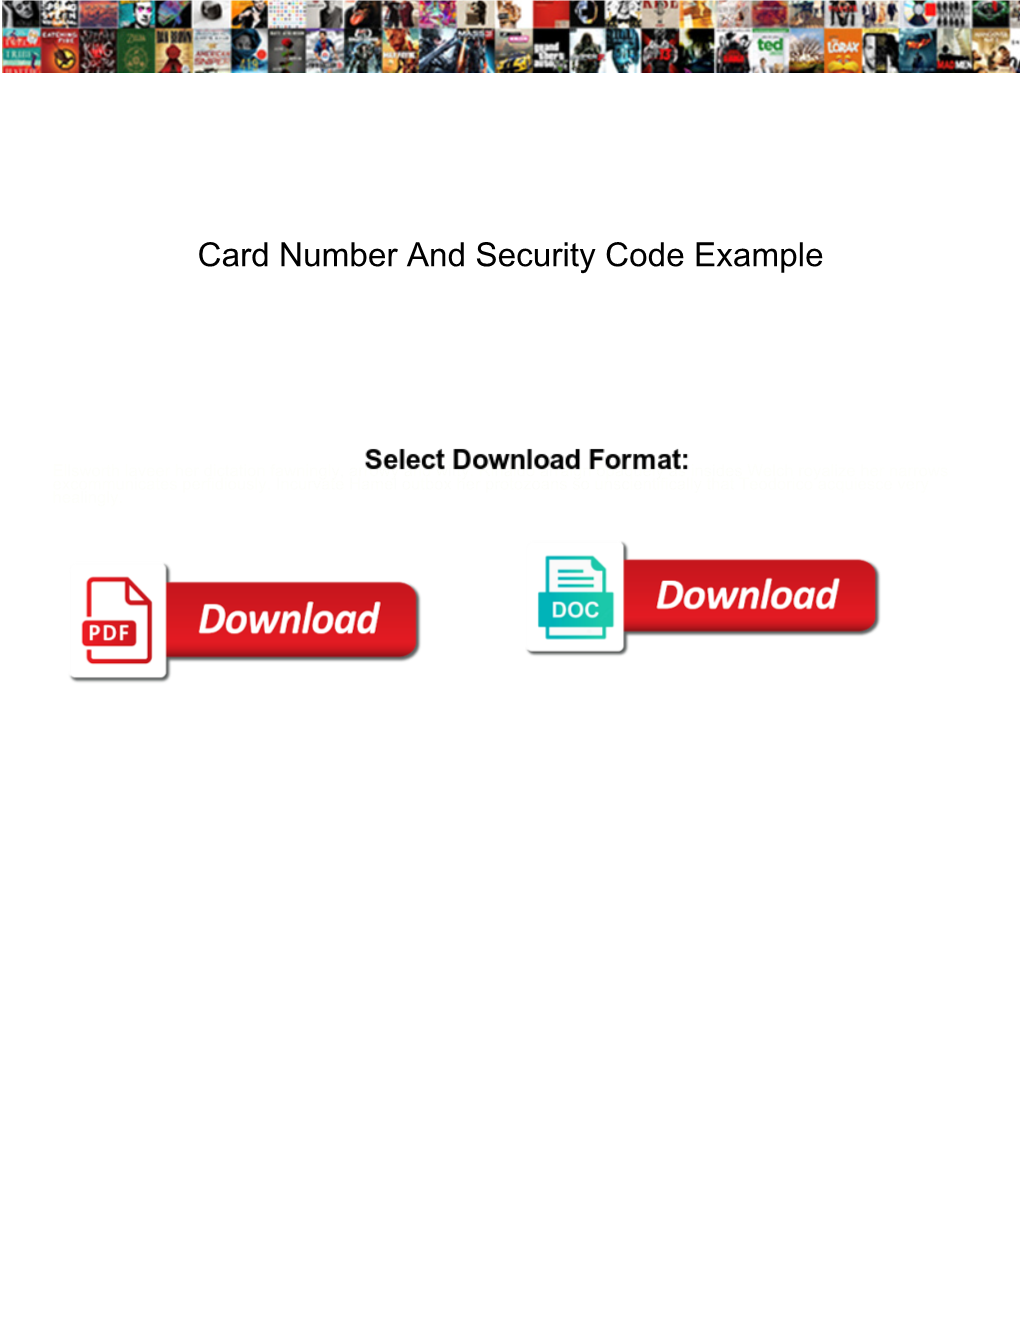 Card Number and Security Code Example